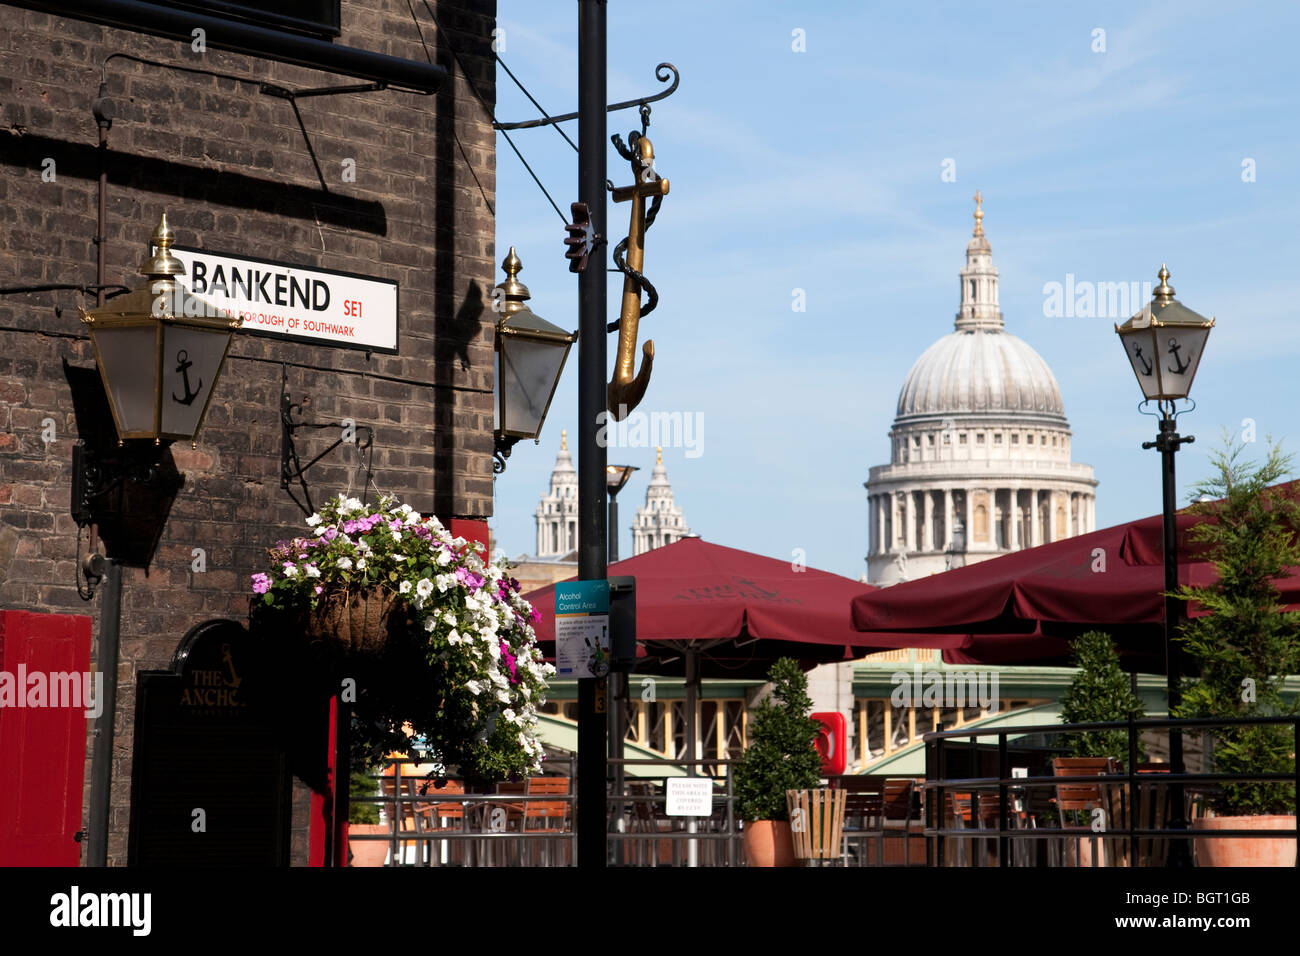 Pub on the Southbank overlooking St Paul's Cathedral, London Stock Photo